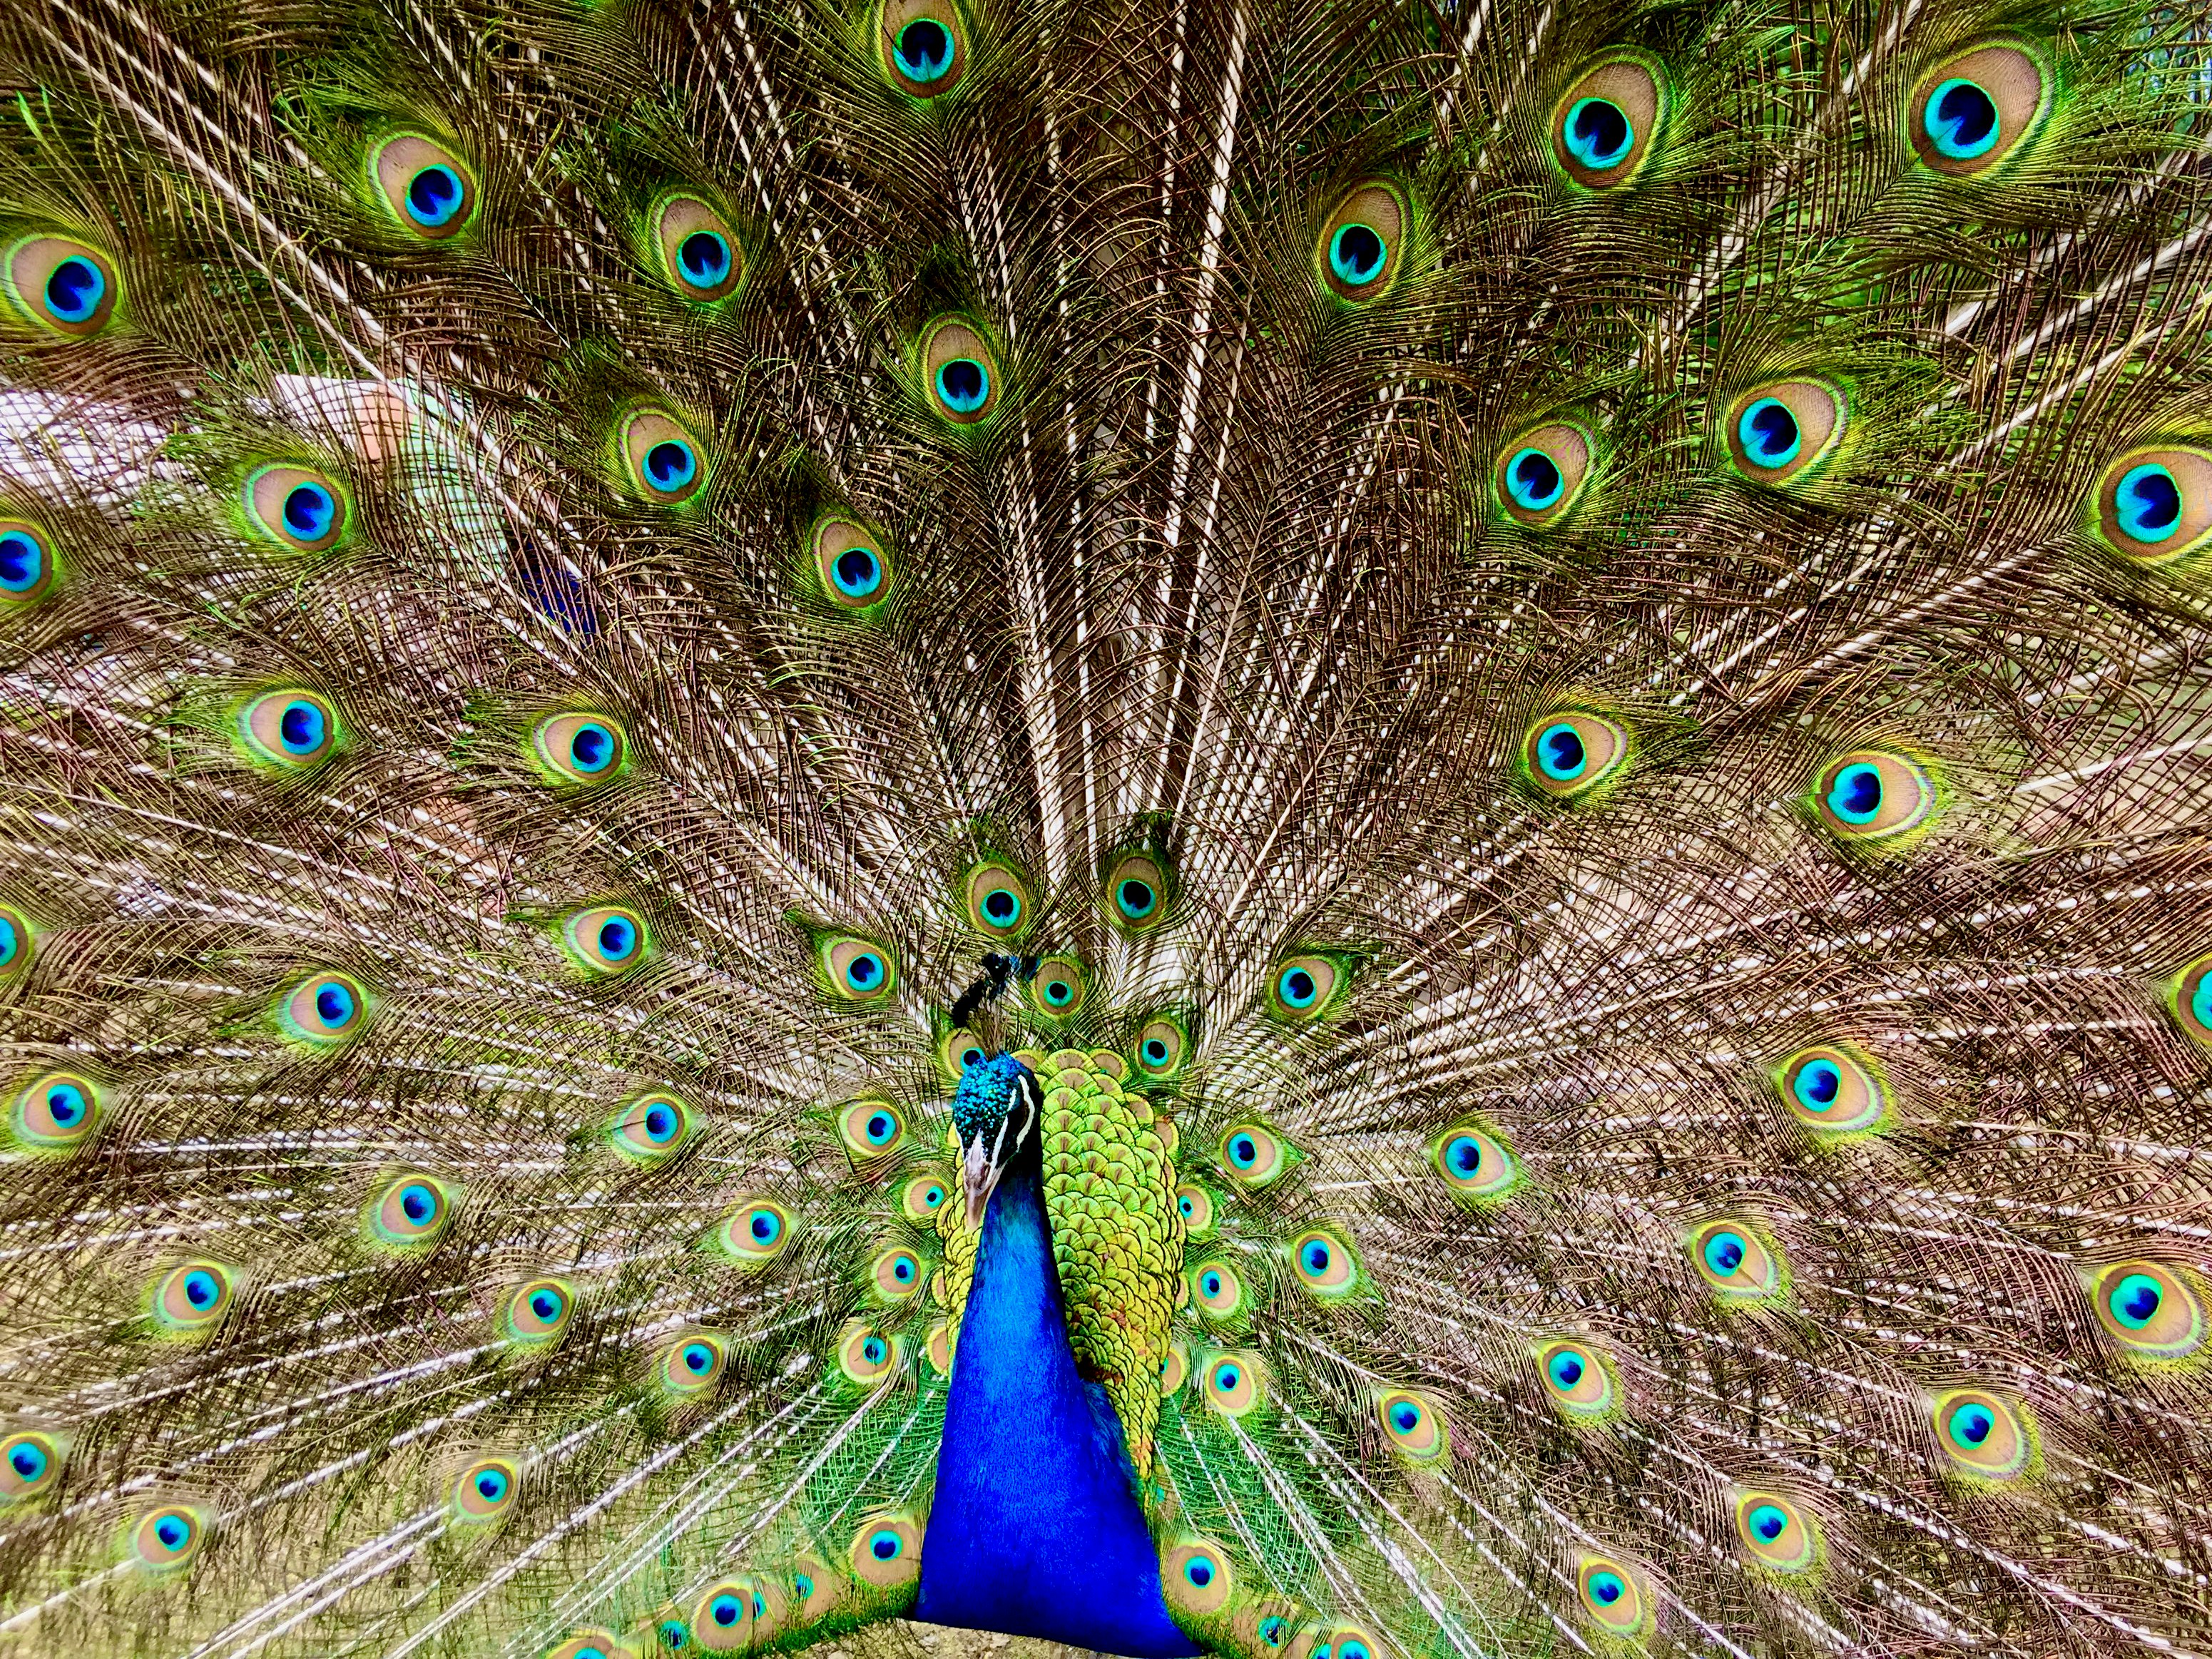 Colourful peacock showing its tail feathers